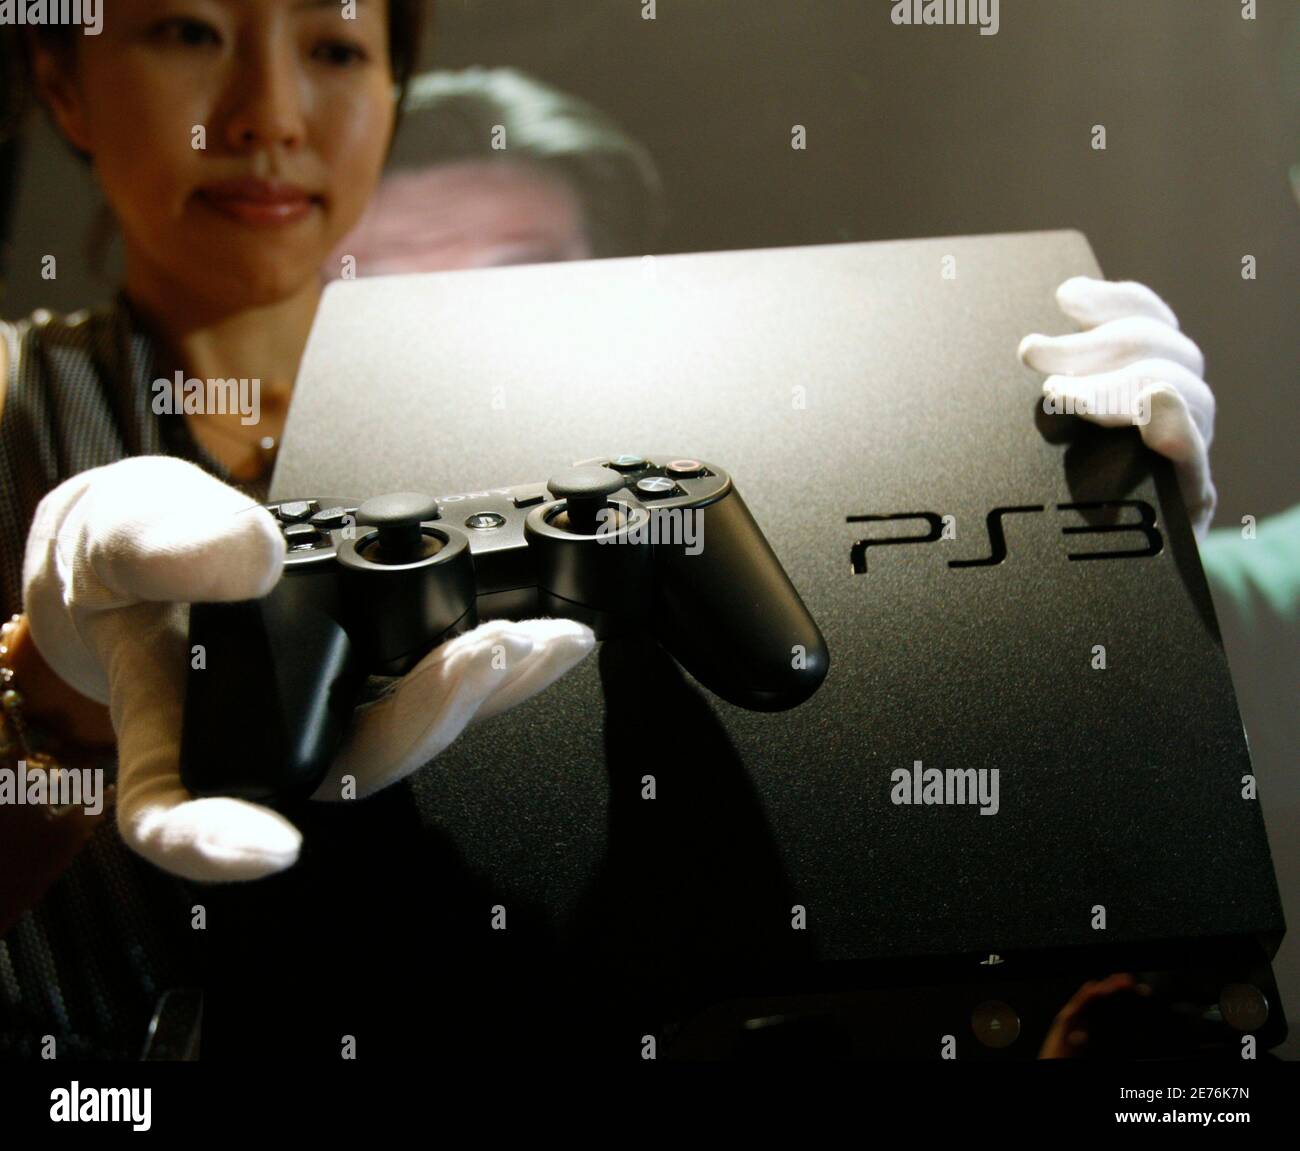 Sony Corp's new PlayStation 3 game console is displayed during a news  conference in Tokyo August 19, 2009. Sony Corp will launch a slimmer,  cheaper version of its PlayStation 3 game console